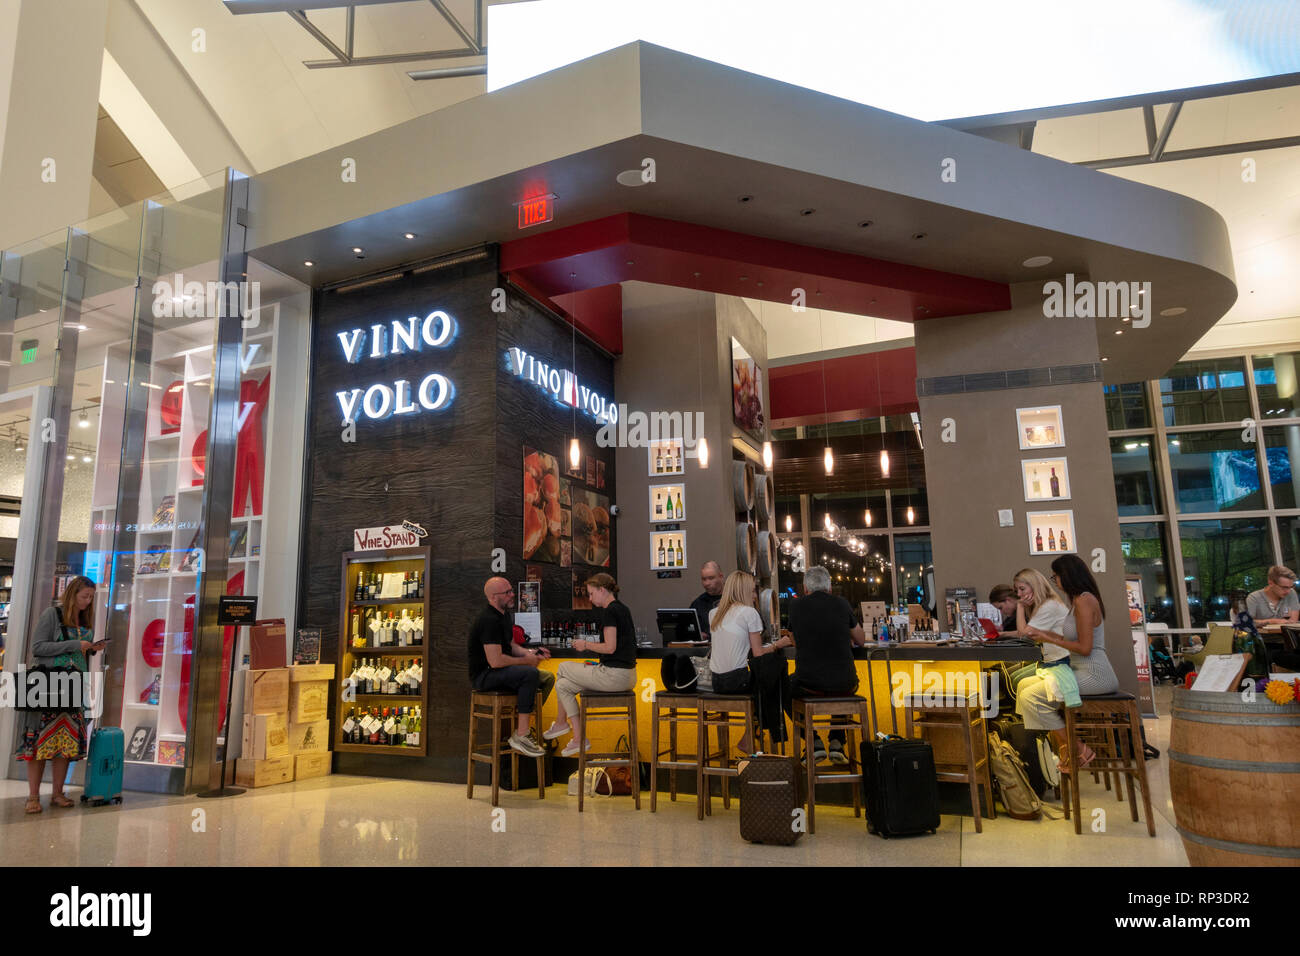 A Vino Volo food and wine bar with a boutique wine shop inside Los Angeles International Airport (LAX), California, United States. Stock Photo